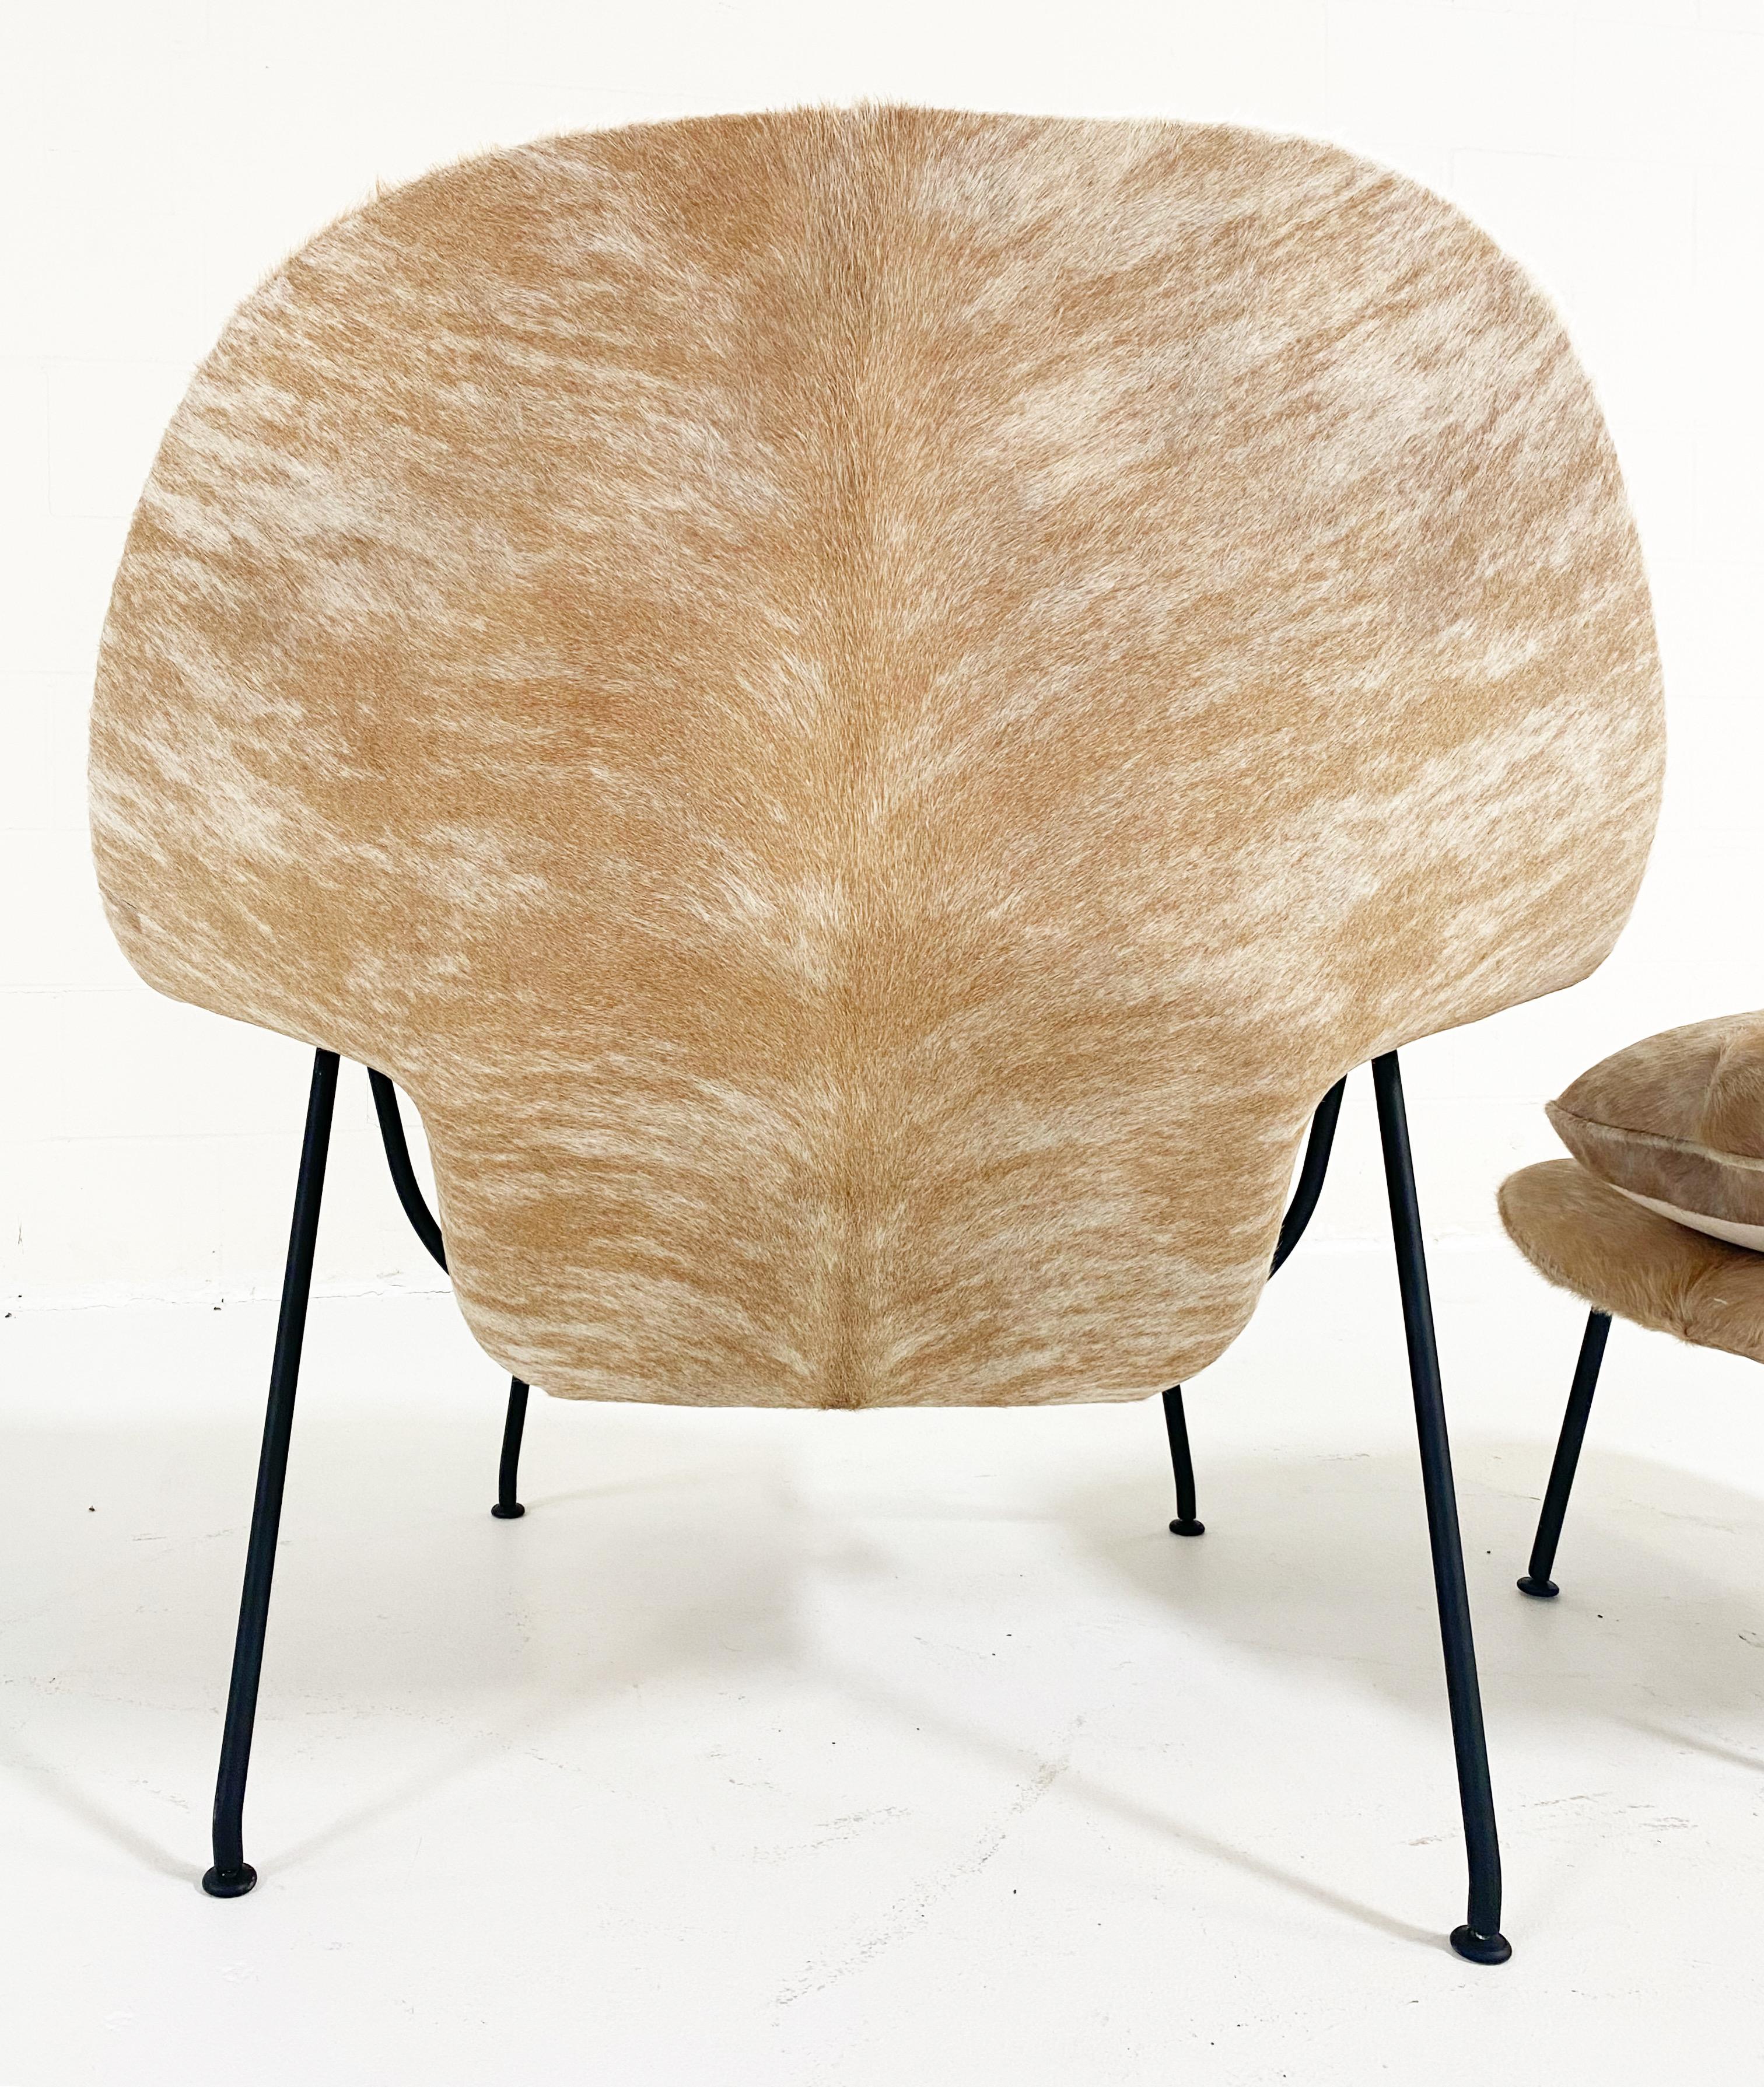 20th Century One-of-a-Kind Eero Saarinen Womb Chair and Ottoman Restored in Brazilian Cowhide